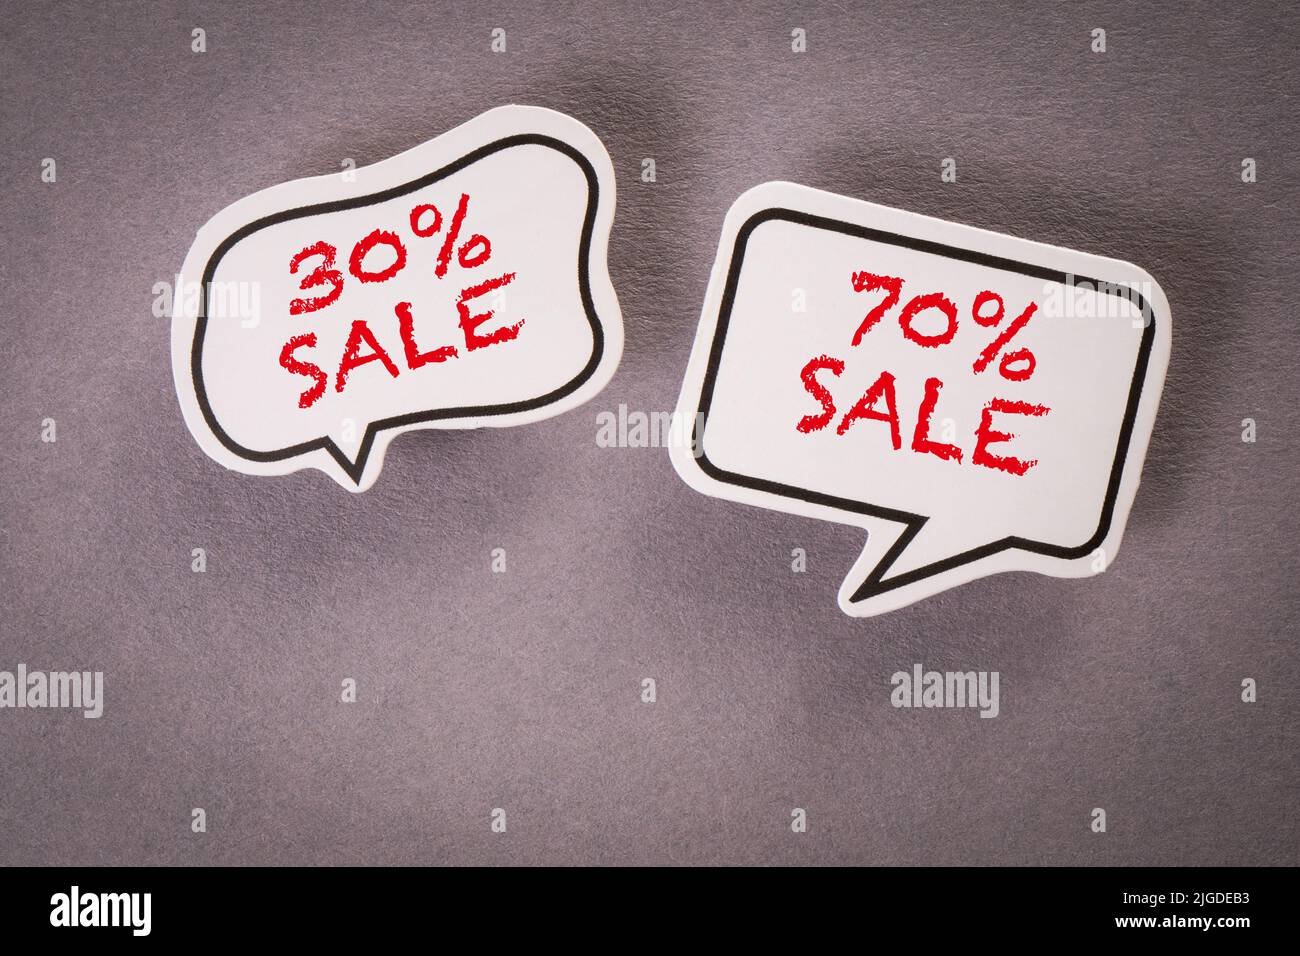 Shopping online. Two speech bubbles on a gray background. Stock Photo